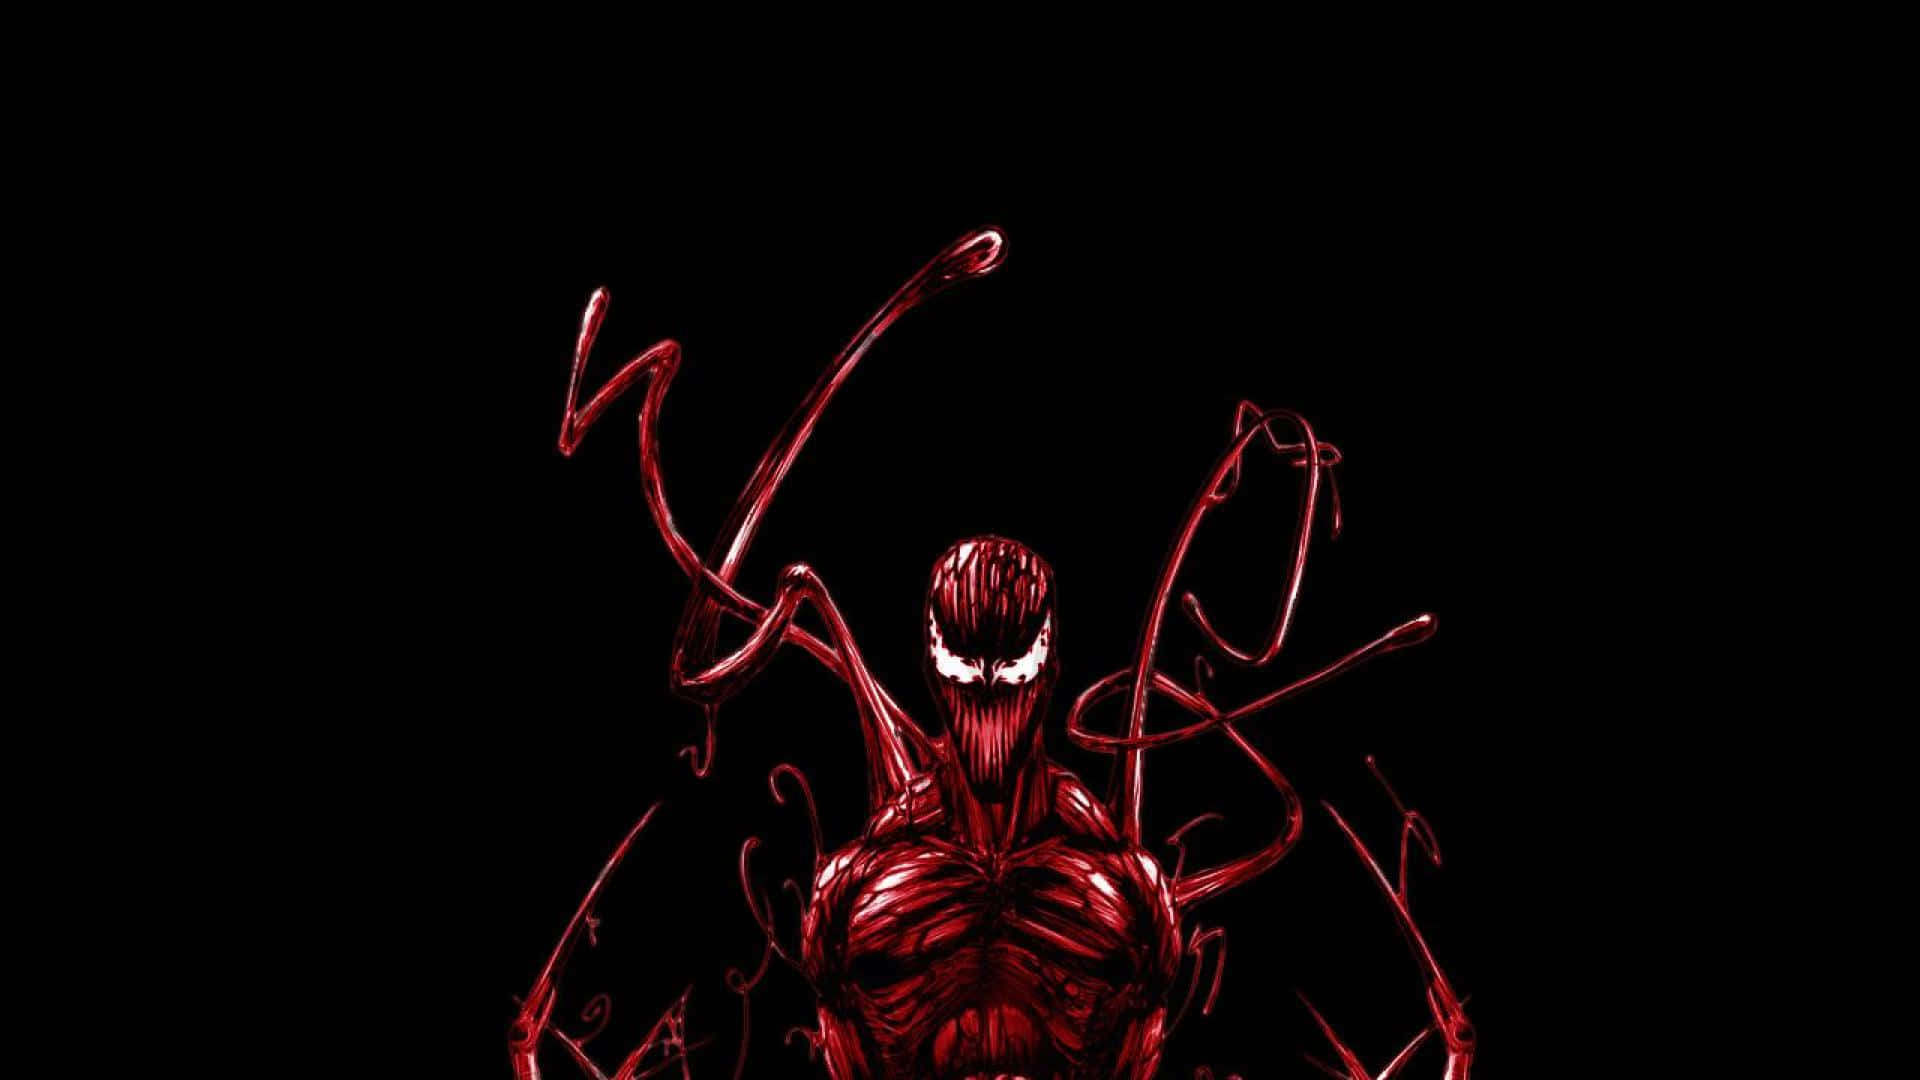 The Symbiote Supervillain Carnage Takes On Marvel Heroes Wallpaper